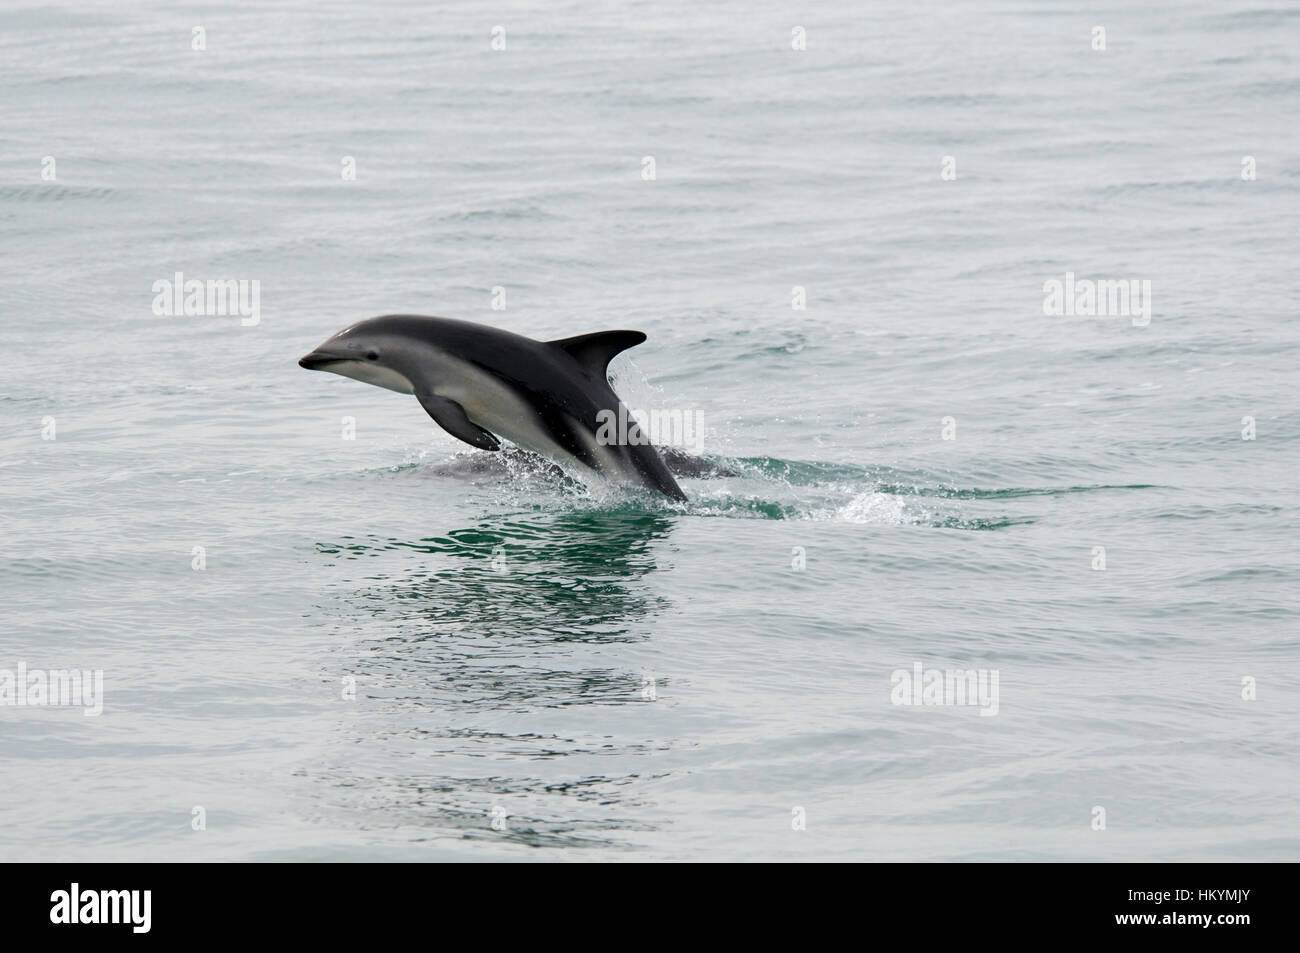 Dusky Dolphin jumping in the Pacific Ocean near Kaikoura in New Zealand. This springing seems to be some mating behavior- Stock Photo